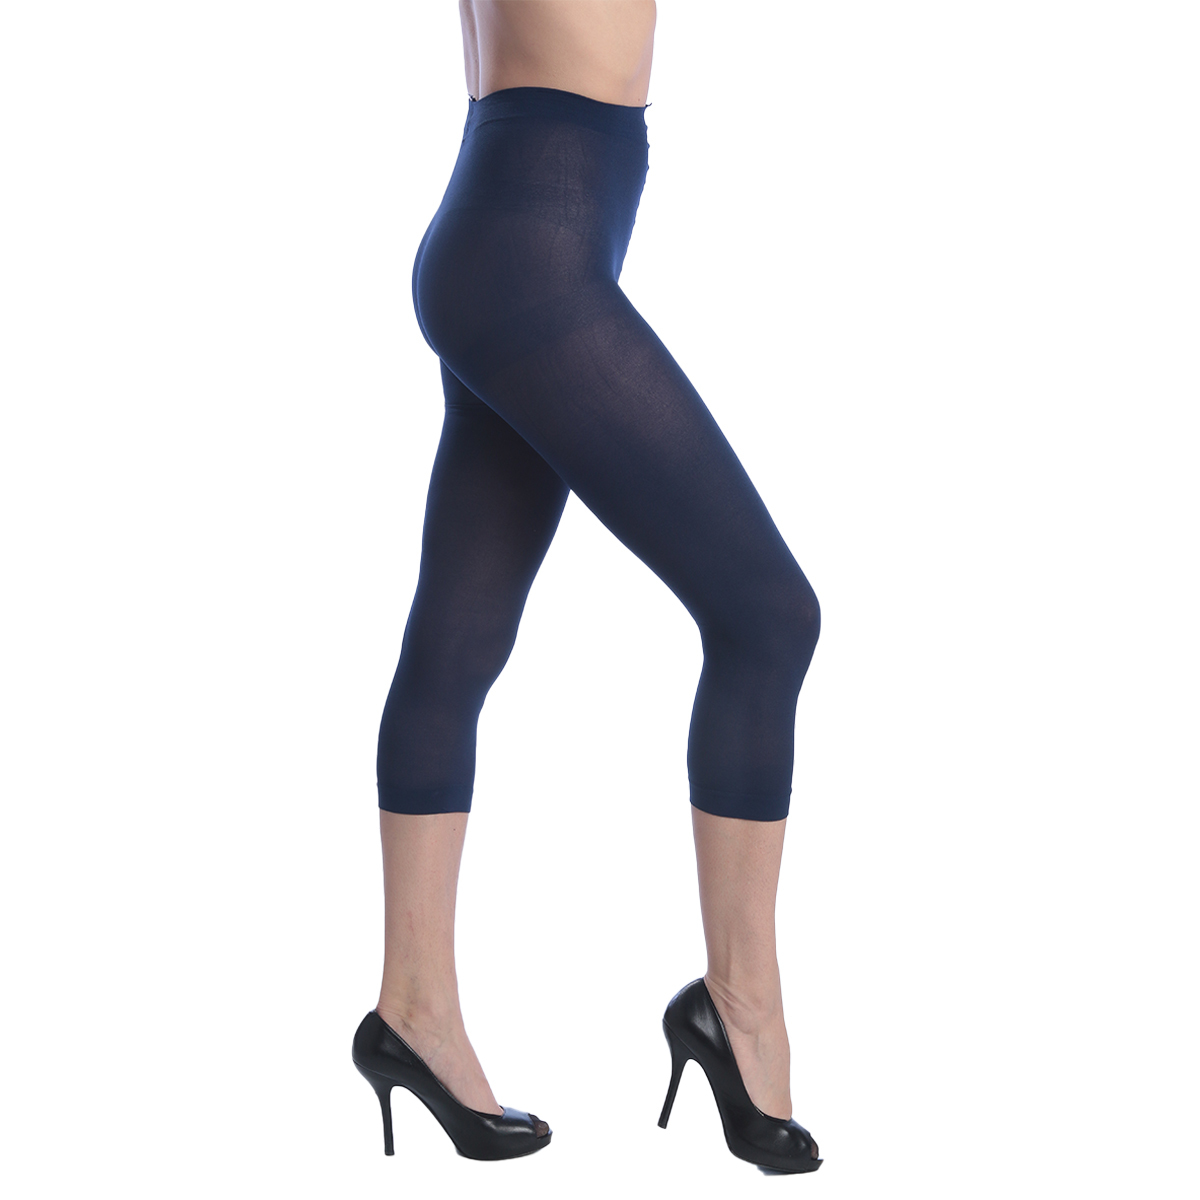 Women's Opaque Footless Capri Tights - Assorted Colors & 2 Sizes